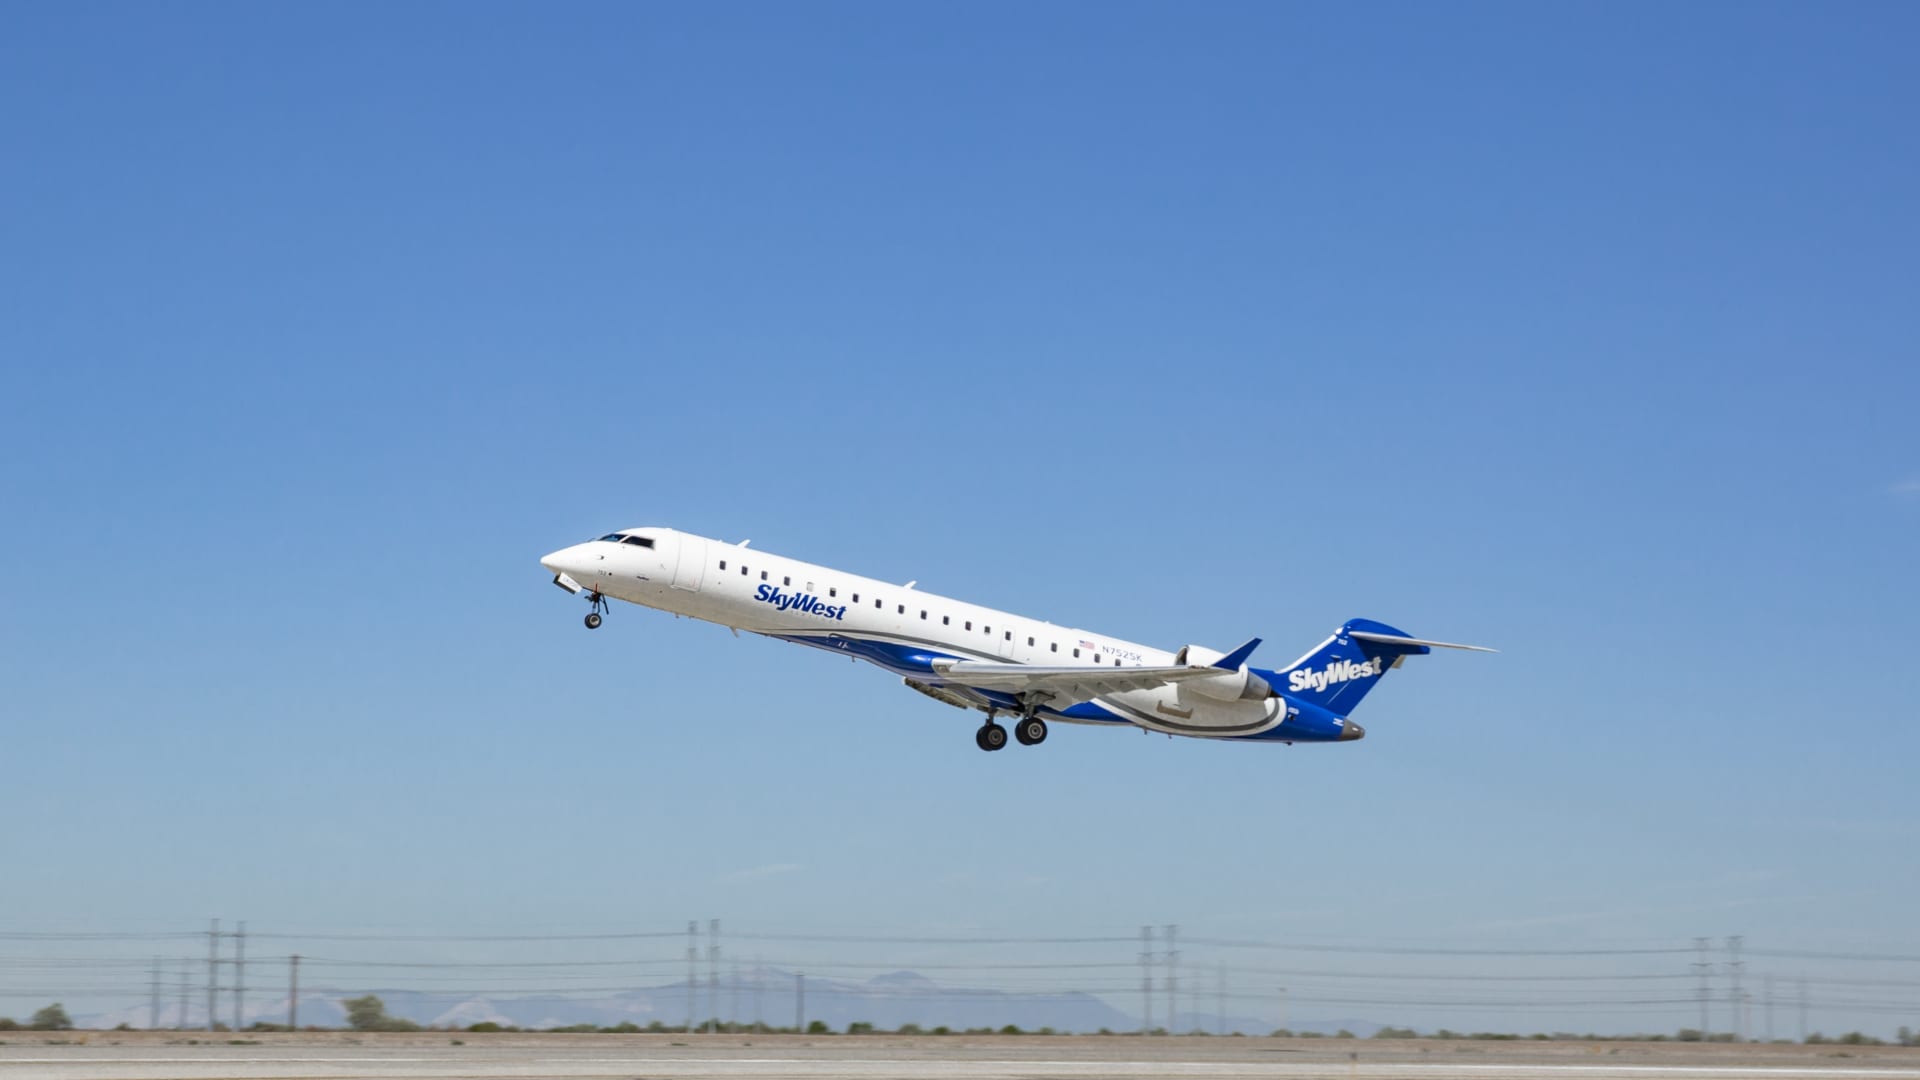 SkyWest ranked as the second best U.S. airline, according to WalletHub.